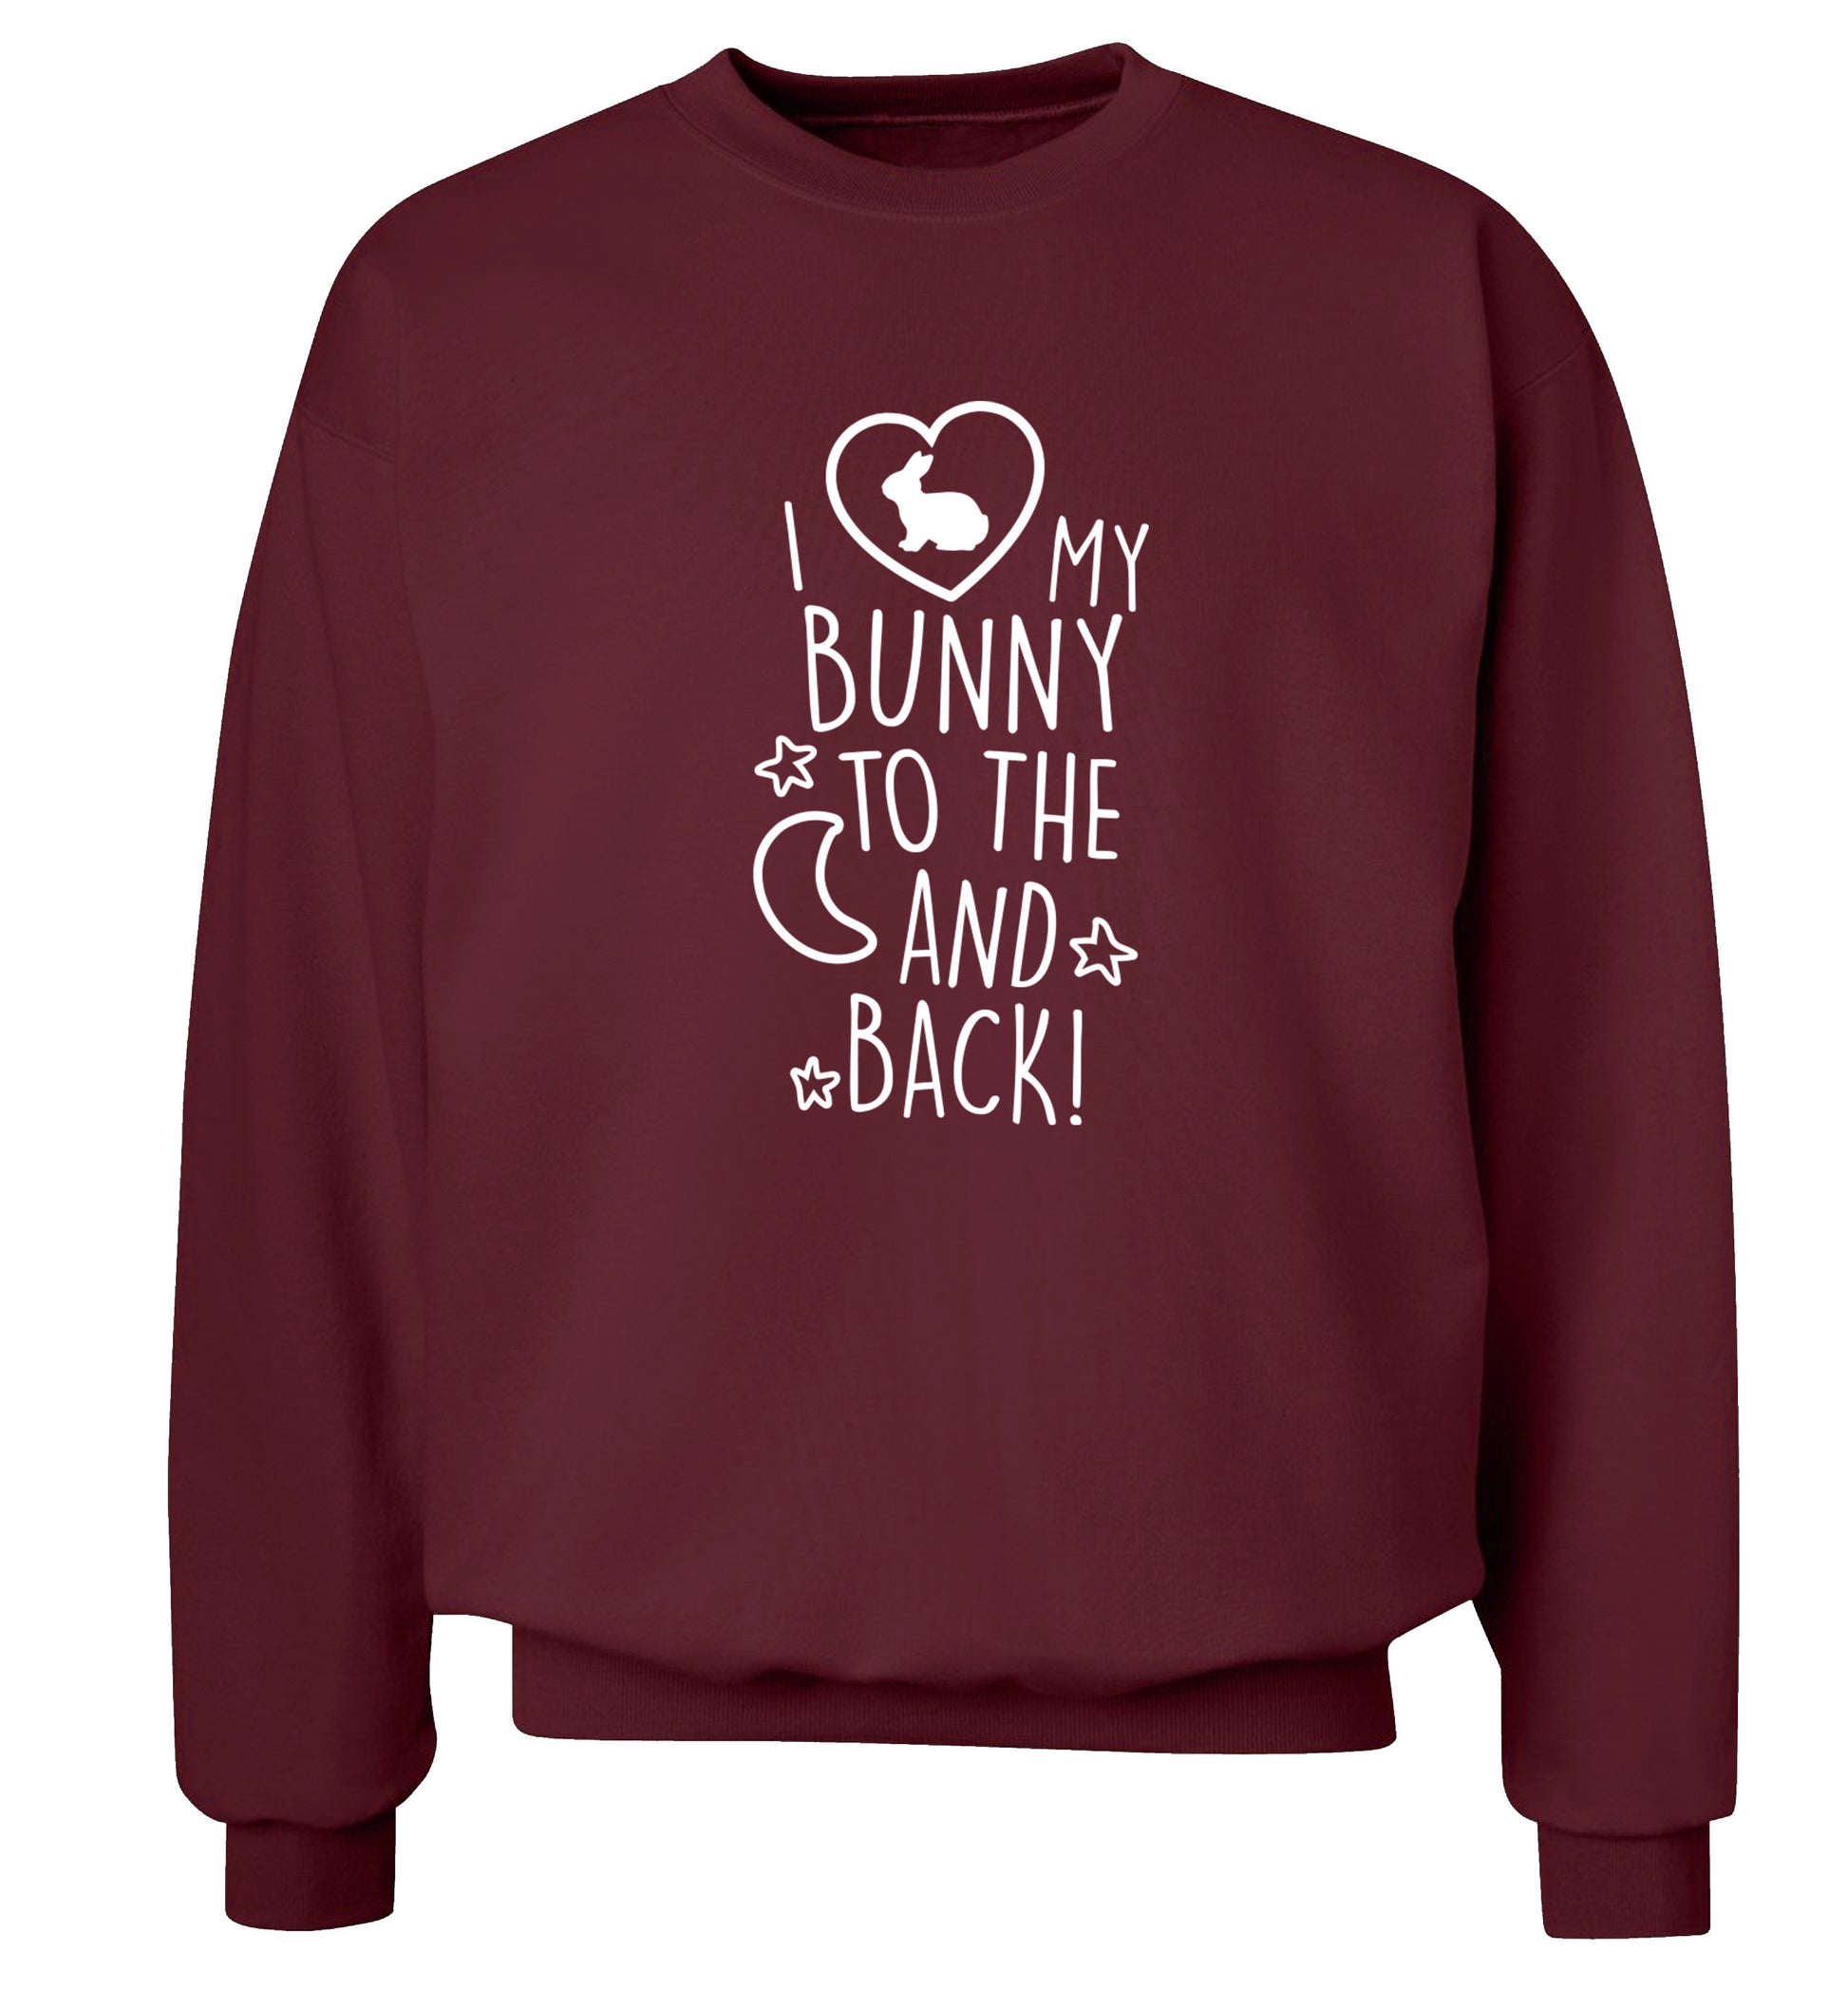 I love my bunny to the moon and back Adult's unisex maroon  sweater 2XL